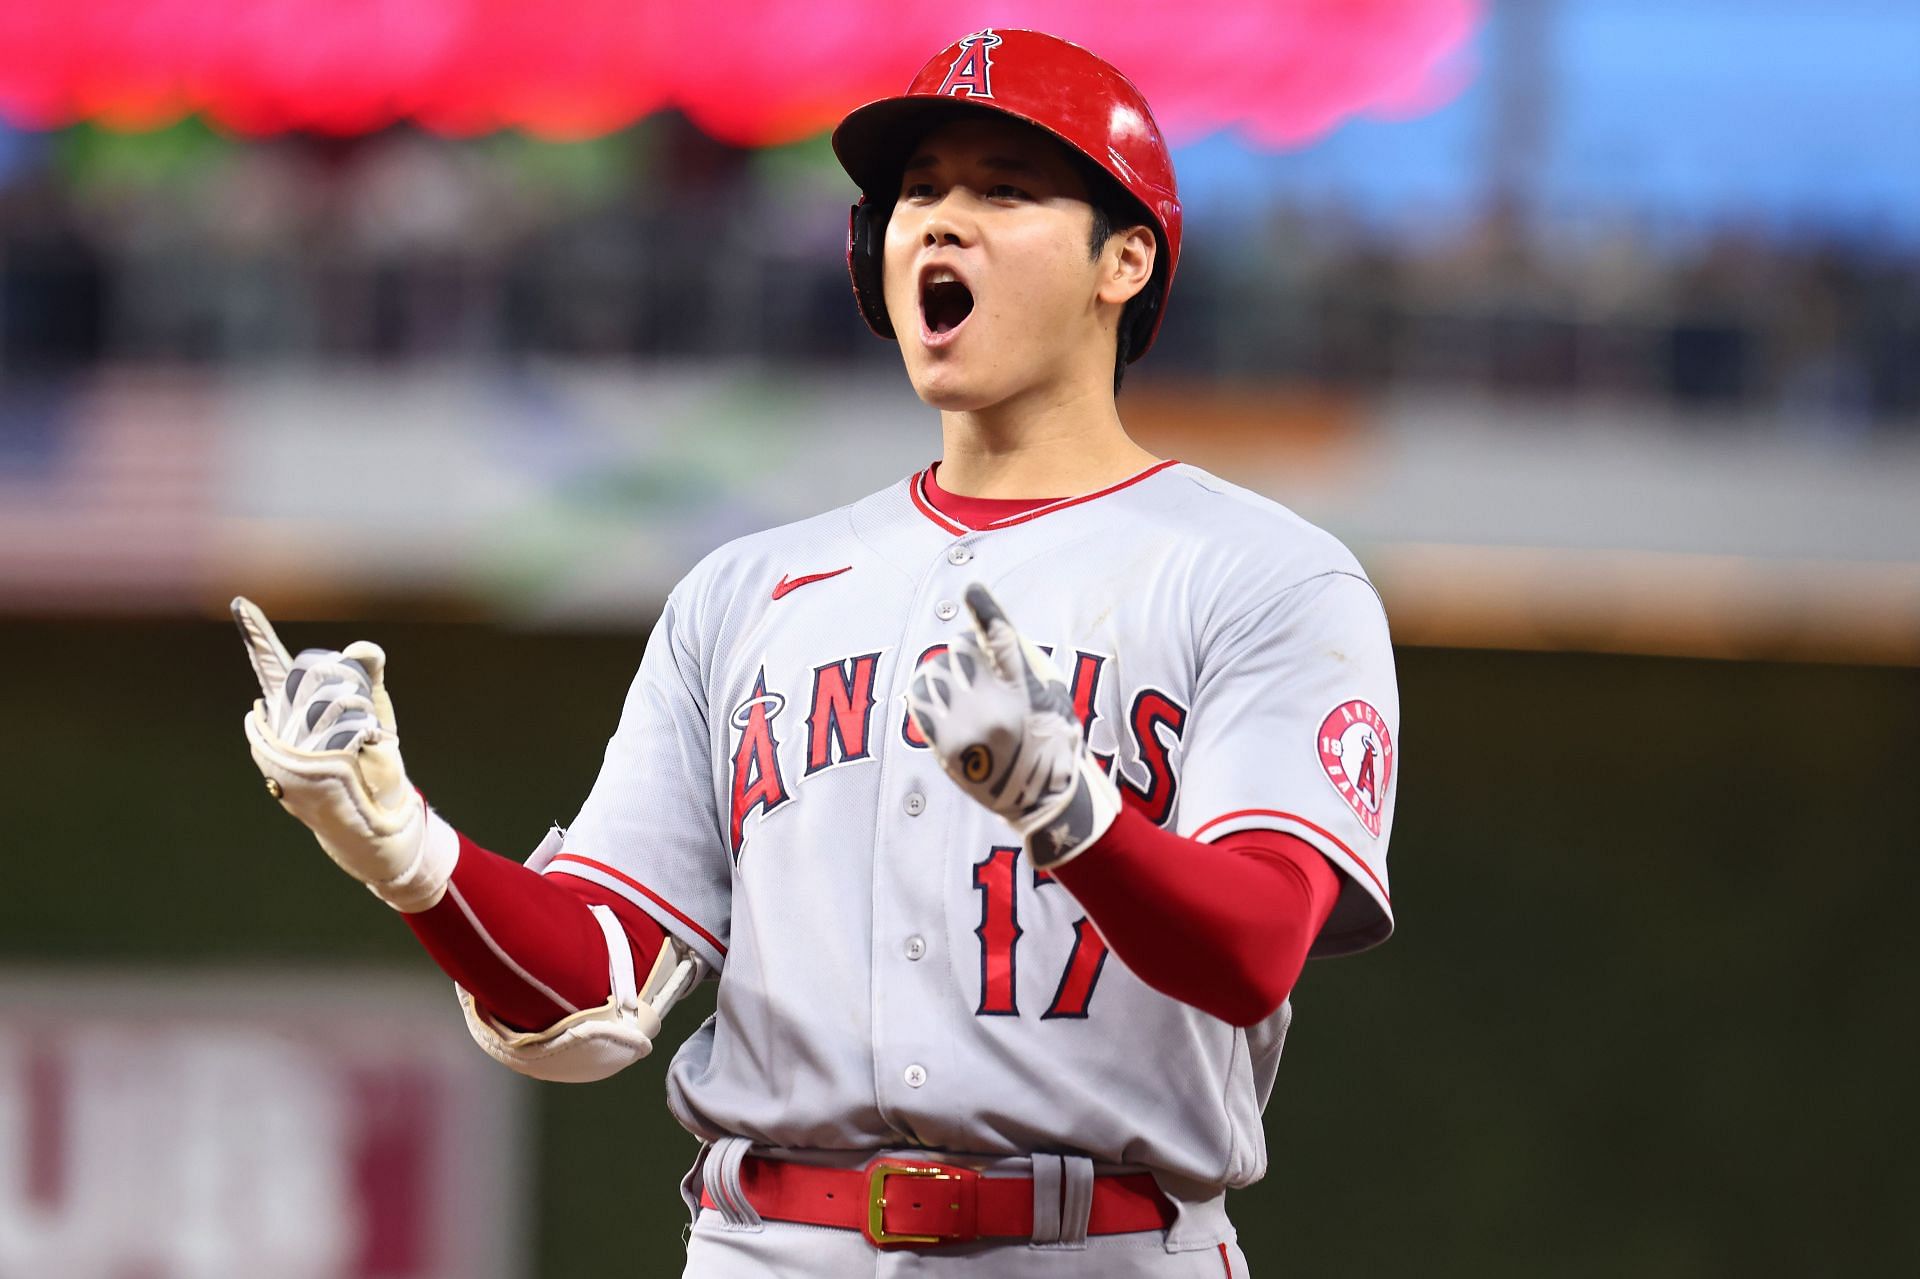 Shohei Ohtani's Agent Won't Discuss Angels Contract Talks, Says